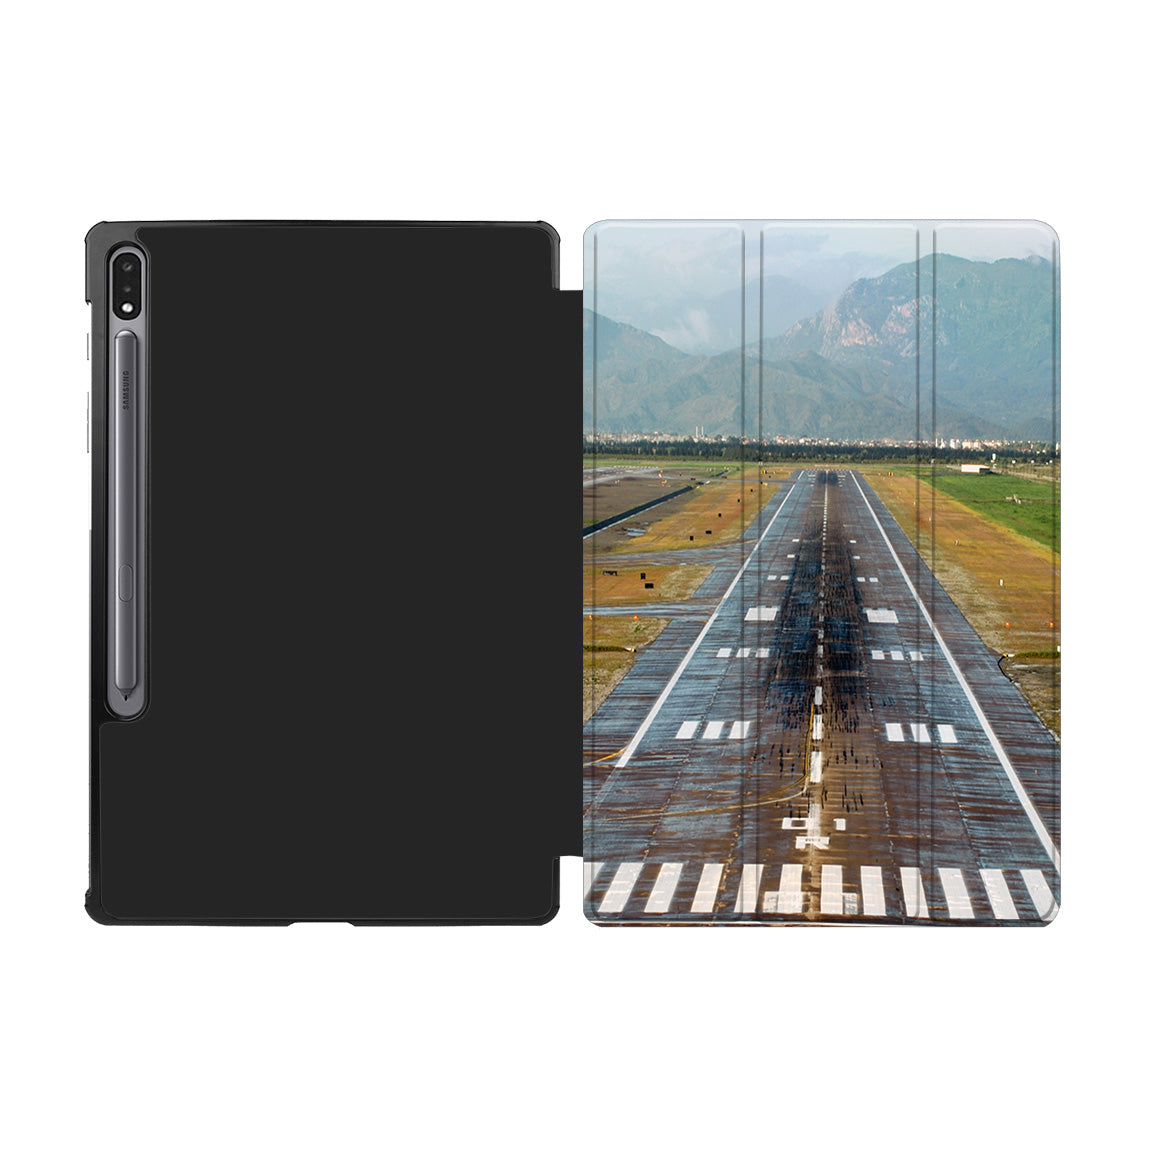 Amazing Mountain View & Runway Designed Samsung Tablet Cases